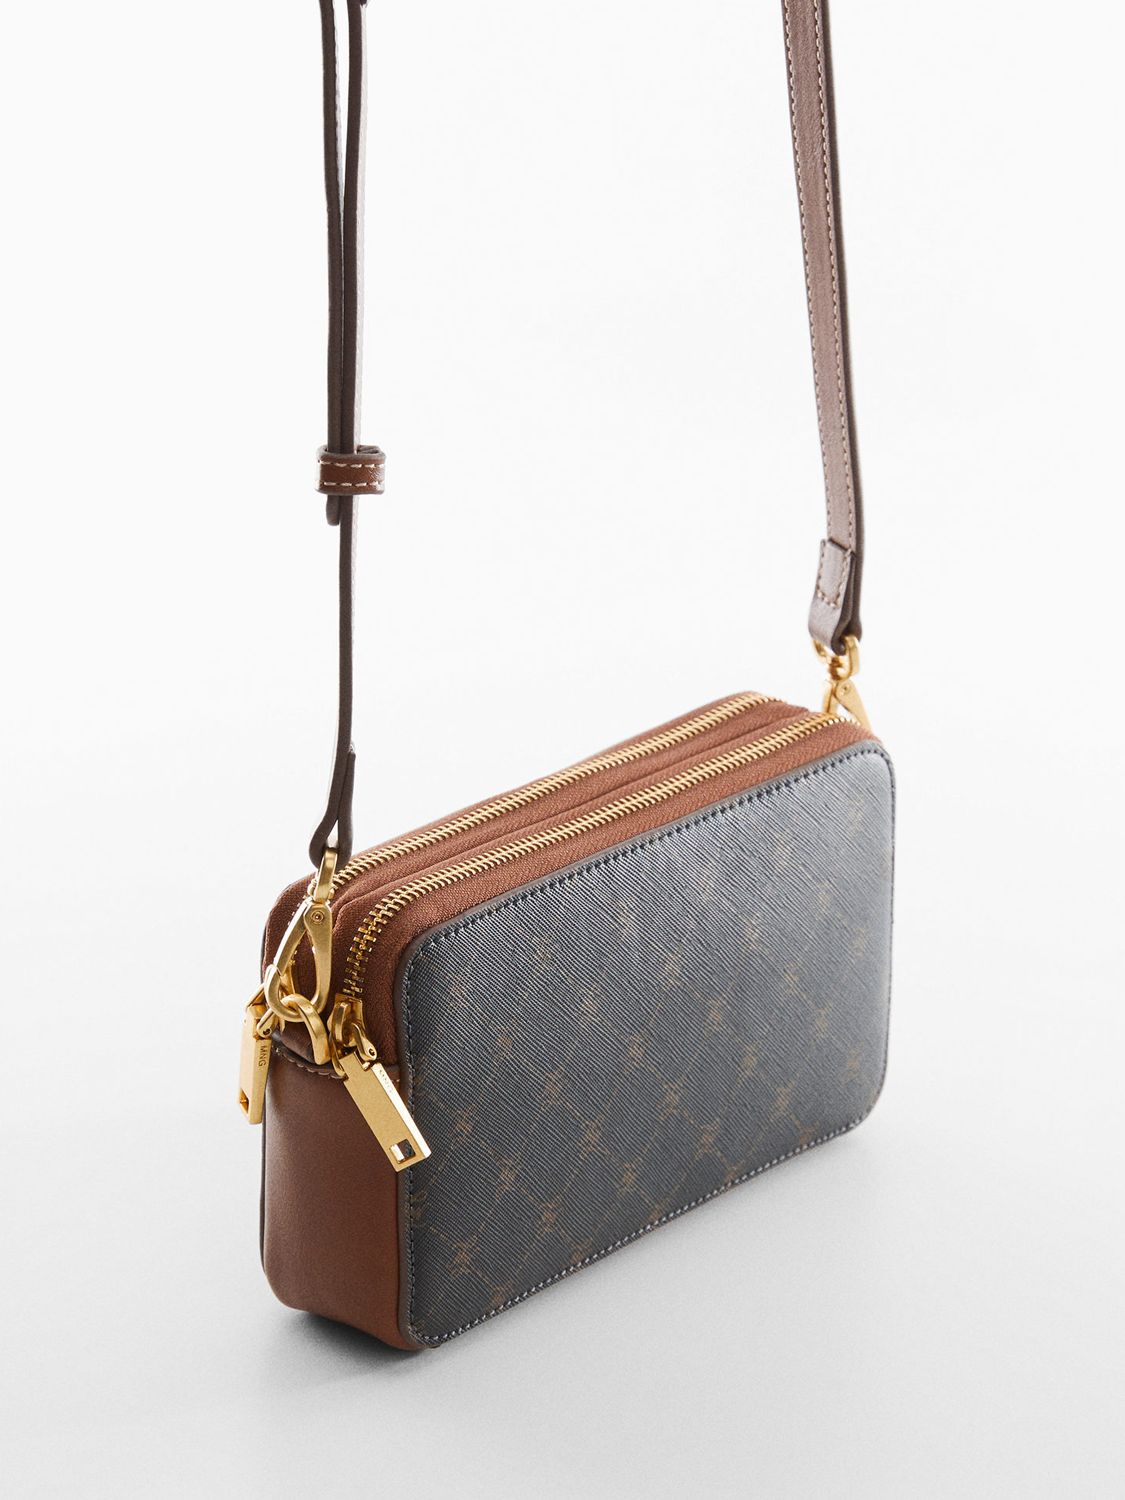 Sell Louis Vuitton Monogram Canvas Outdoor Small Pouch Crossbody Bag - Blue/Brown